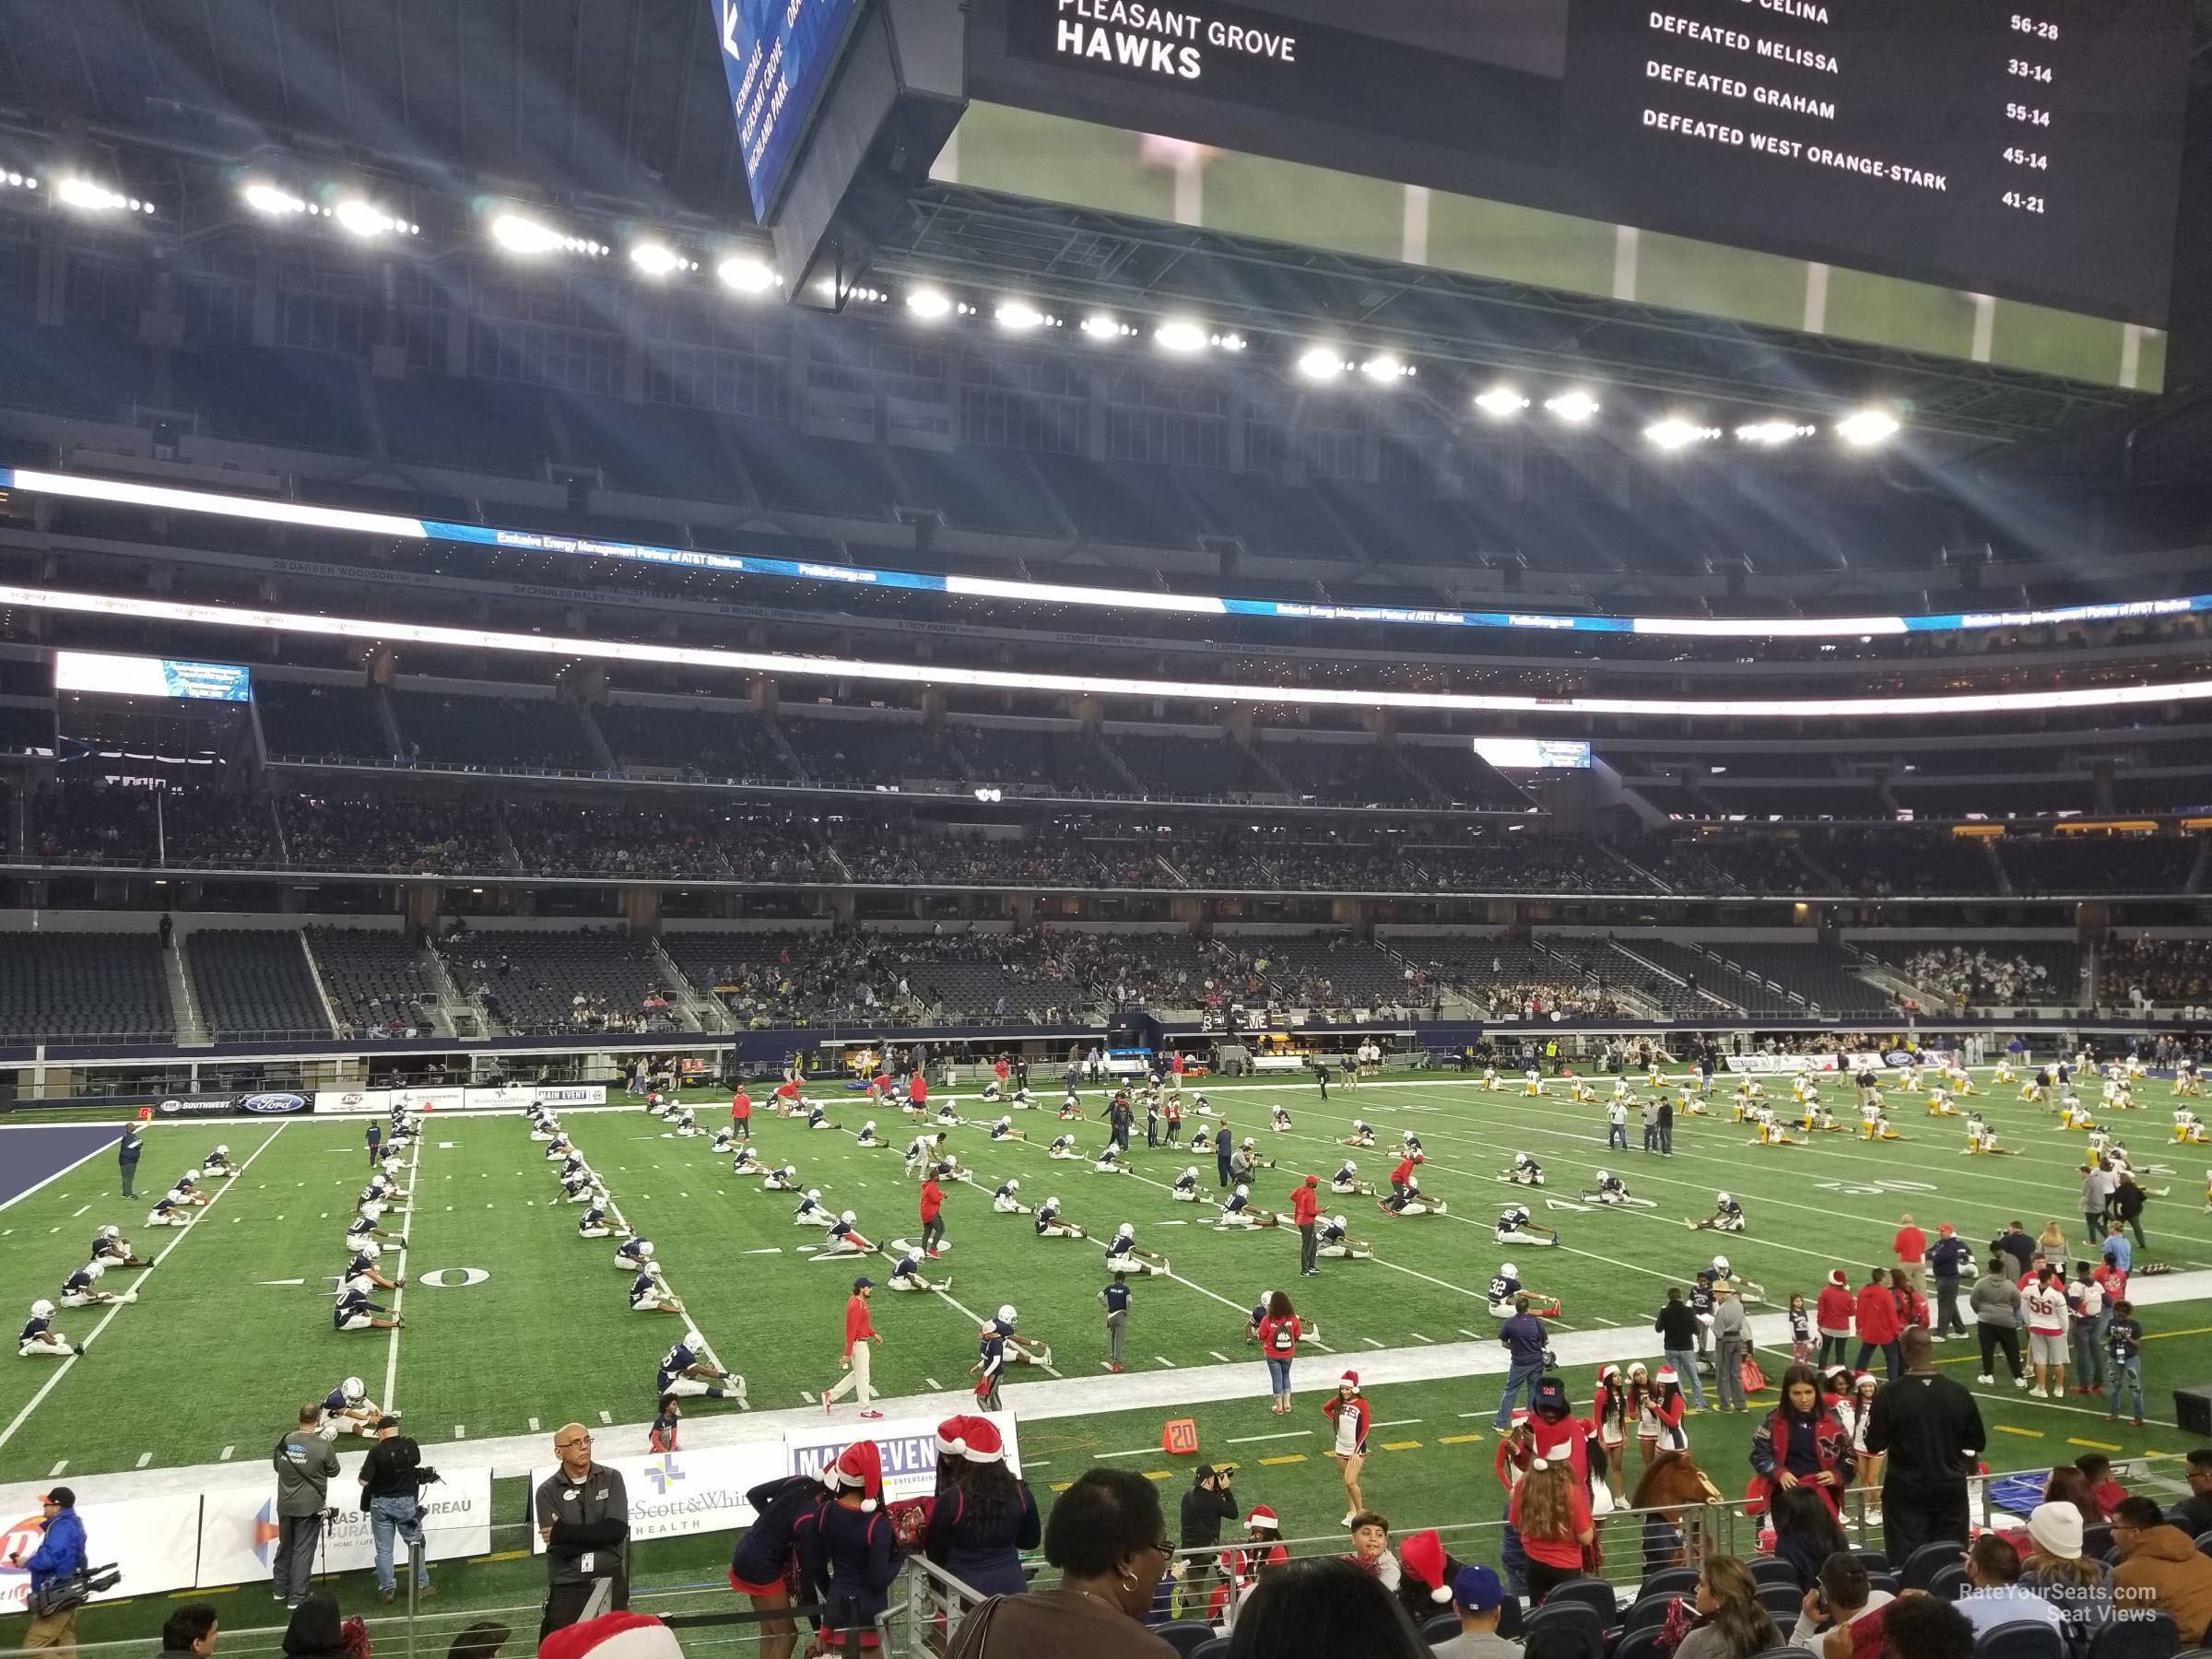 section c114, row 12 seat view  for football - at&t stadium (cowboys stadium)